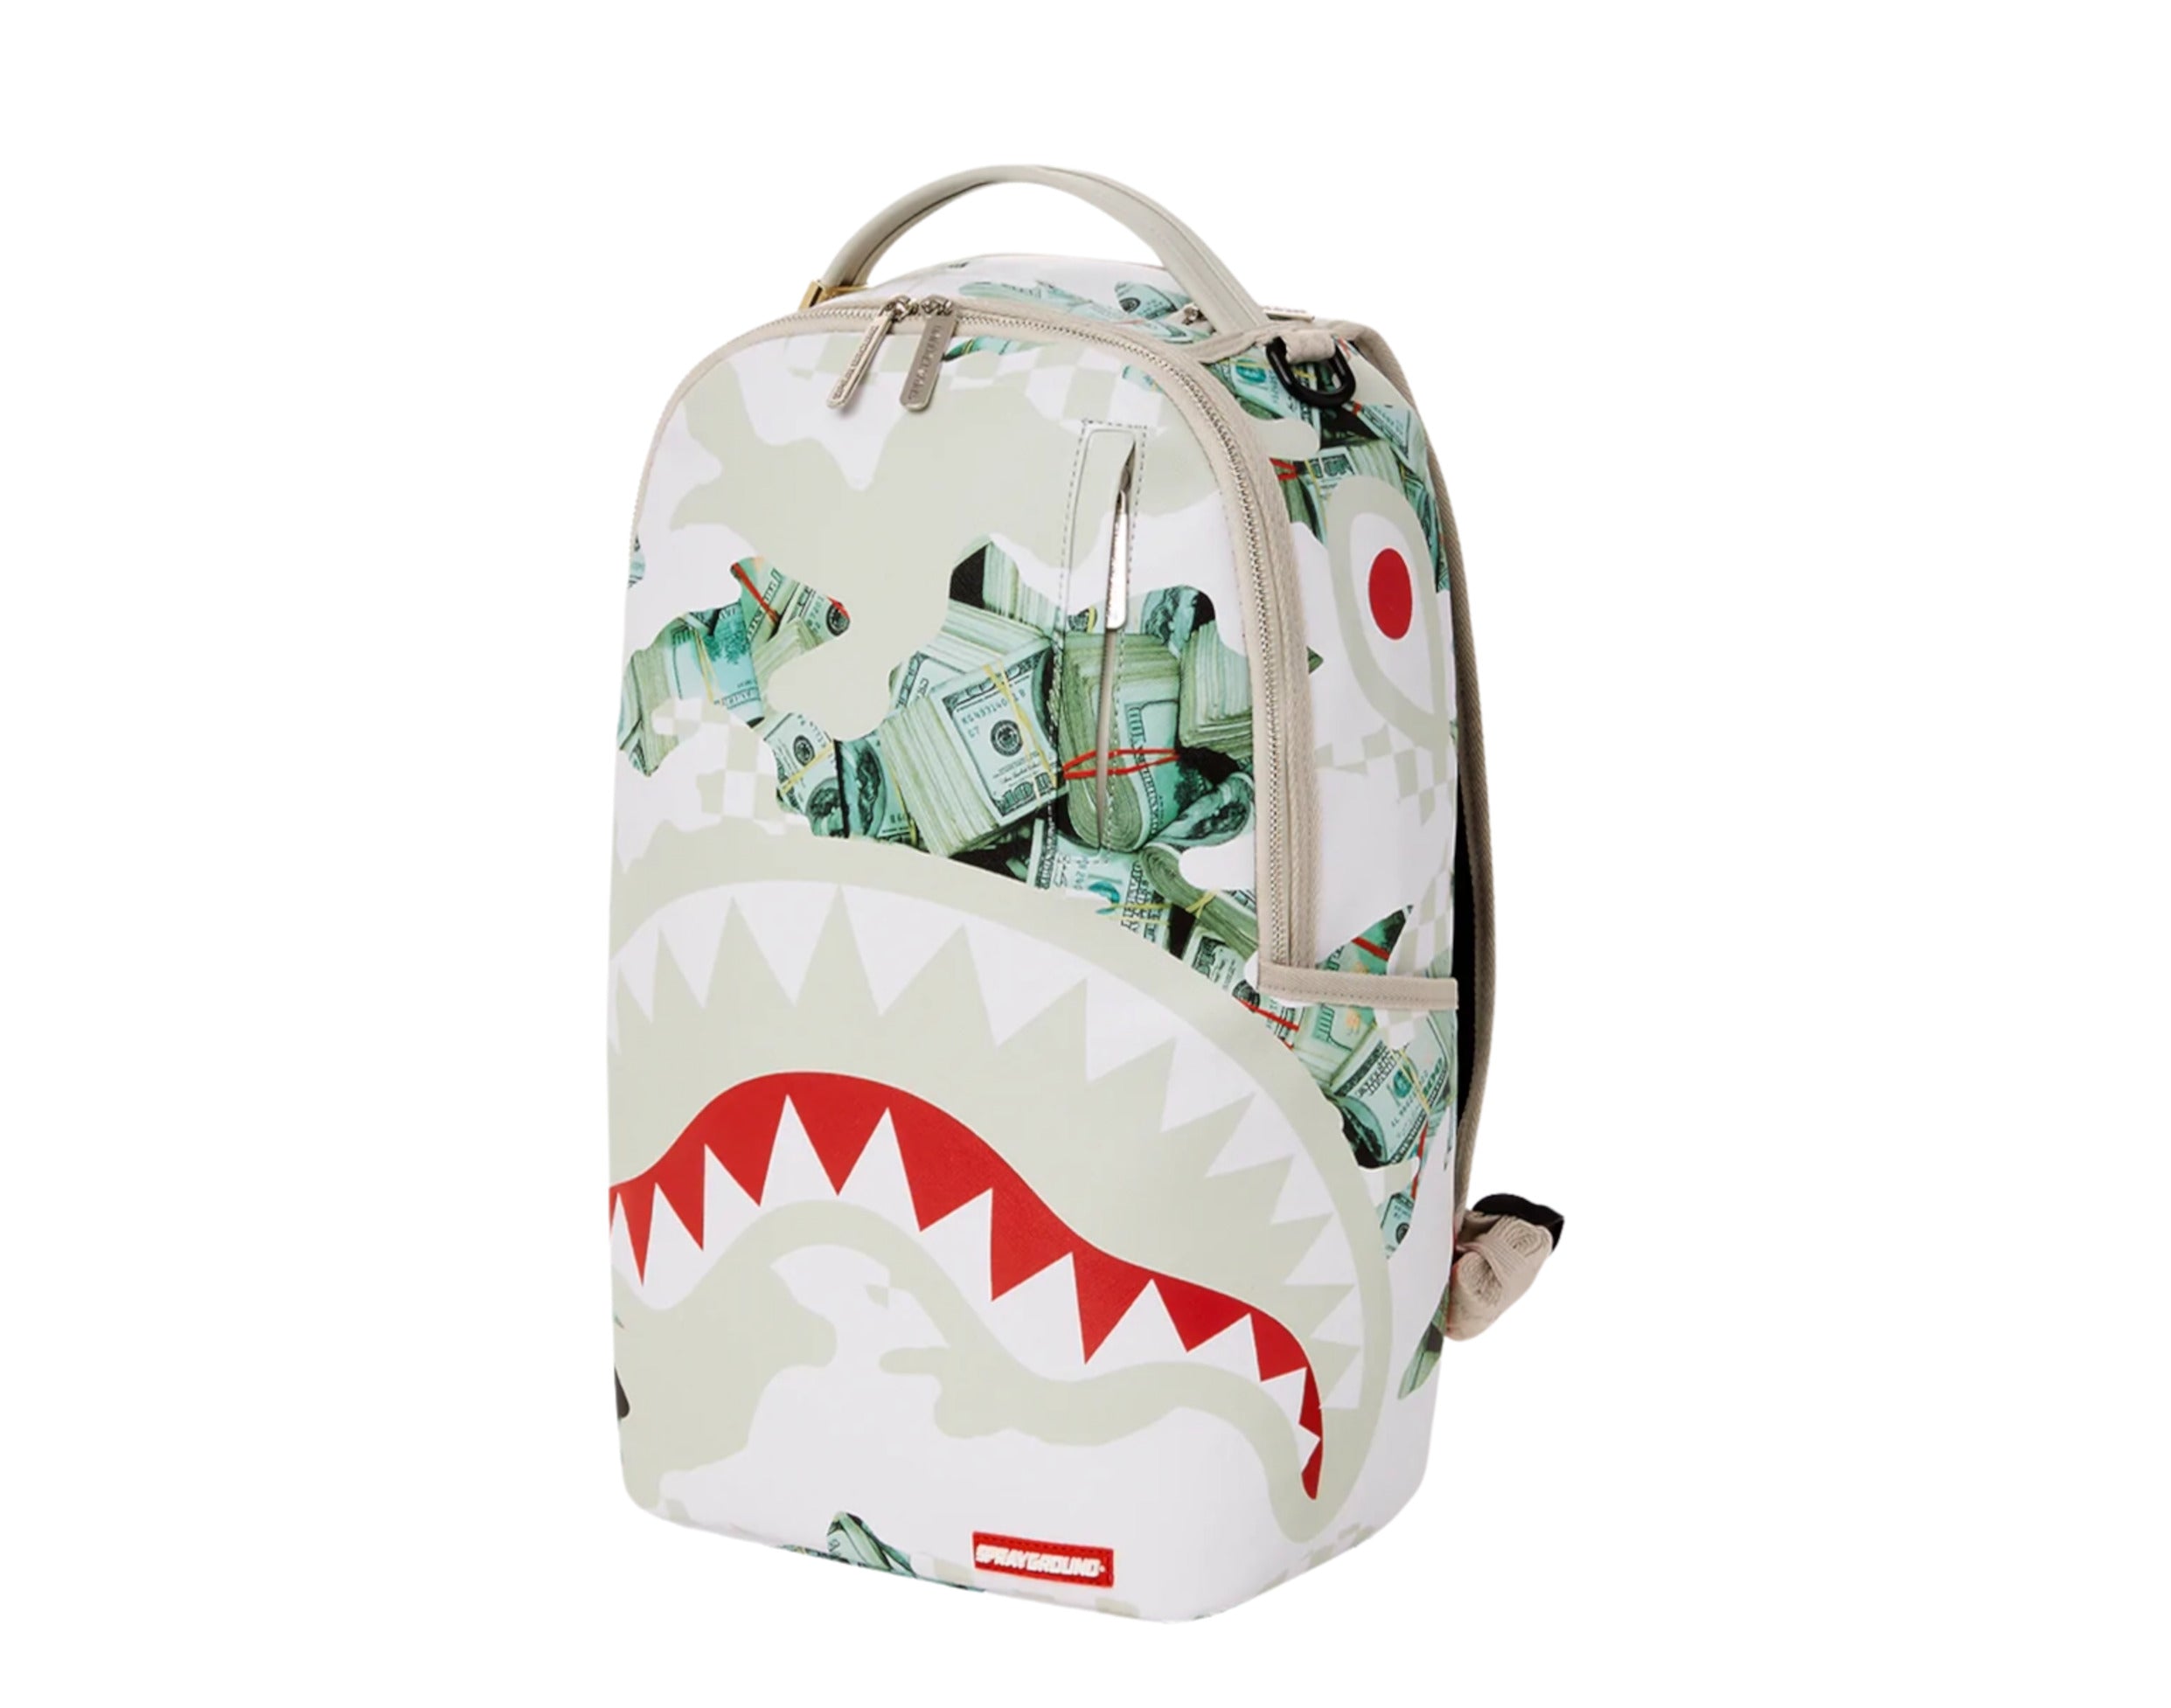 THIS SPRAYGROUND BACKPACK IS DOPE!! (psycho shark review) 